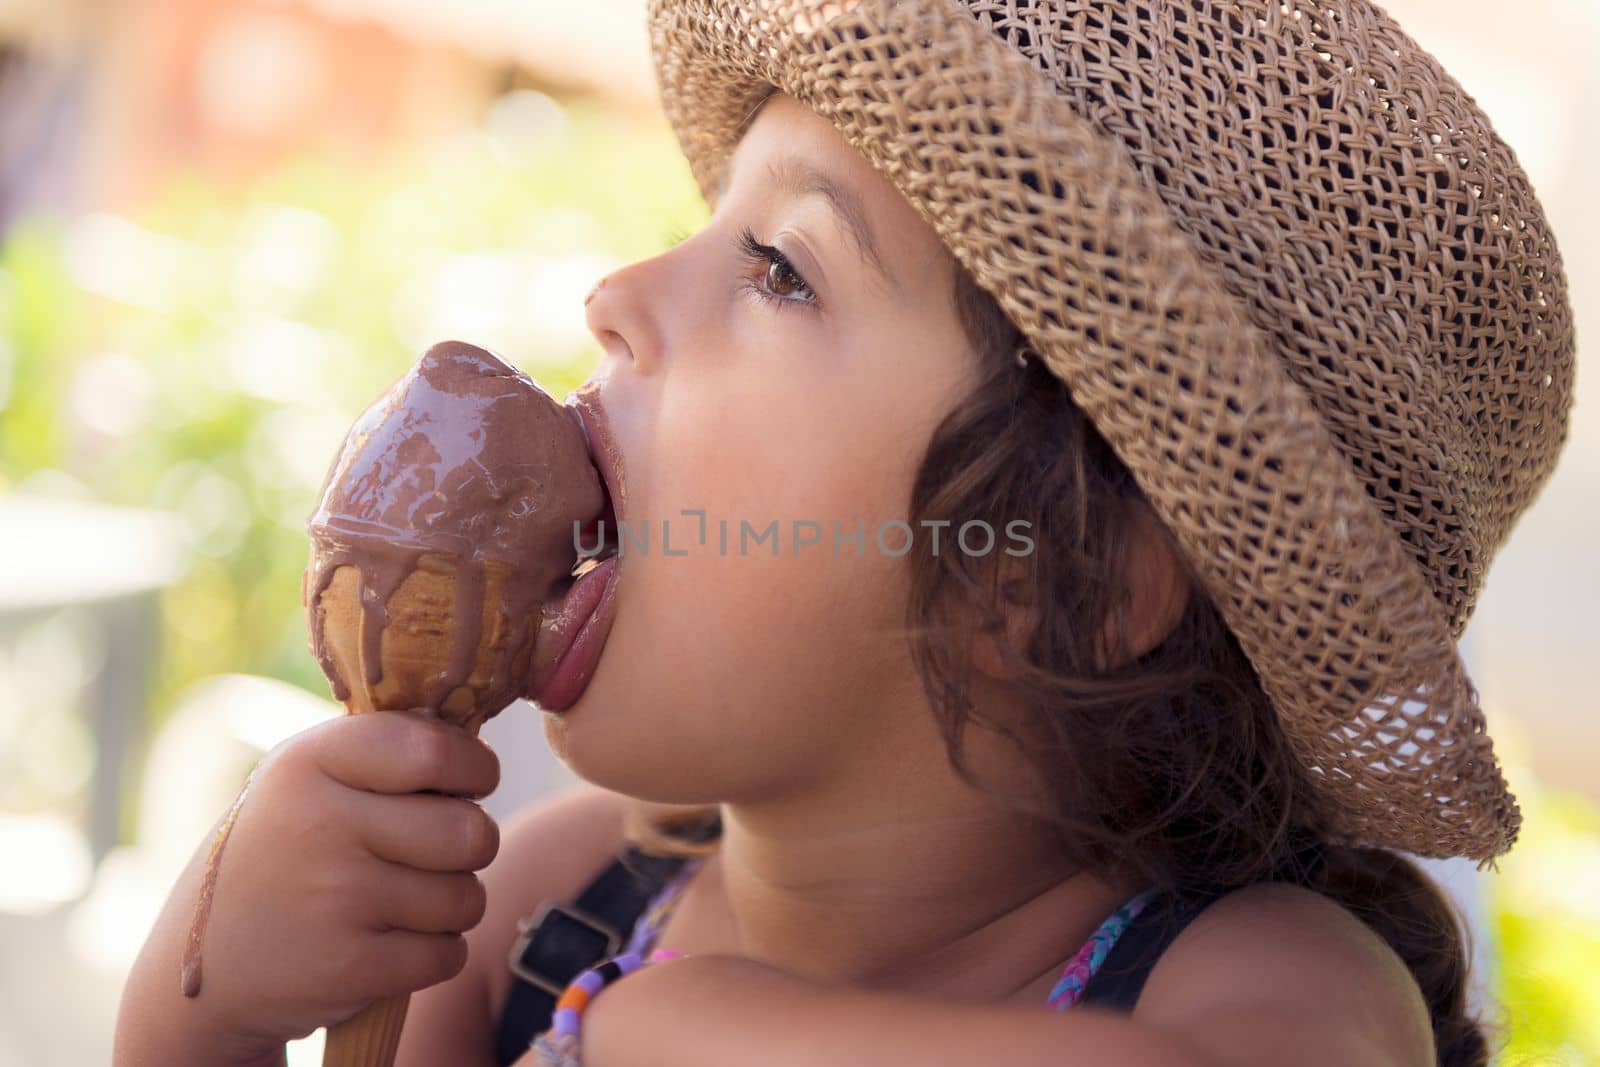 Little girl with a straw hat and a summer dress enjoys the summer heat eating a refreshing cone of chocolate ice cream, it creamy melts in her hand while she licks it with her tongue